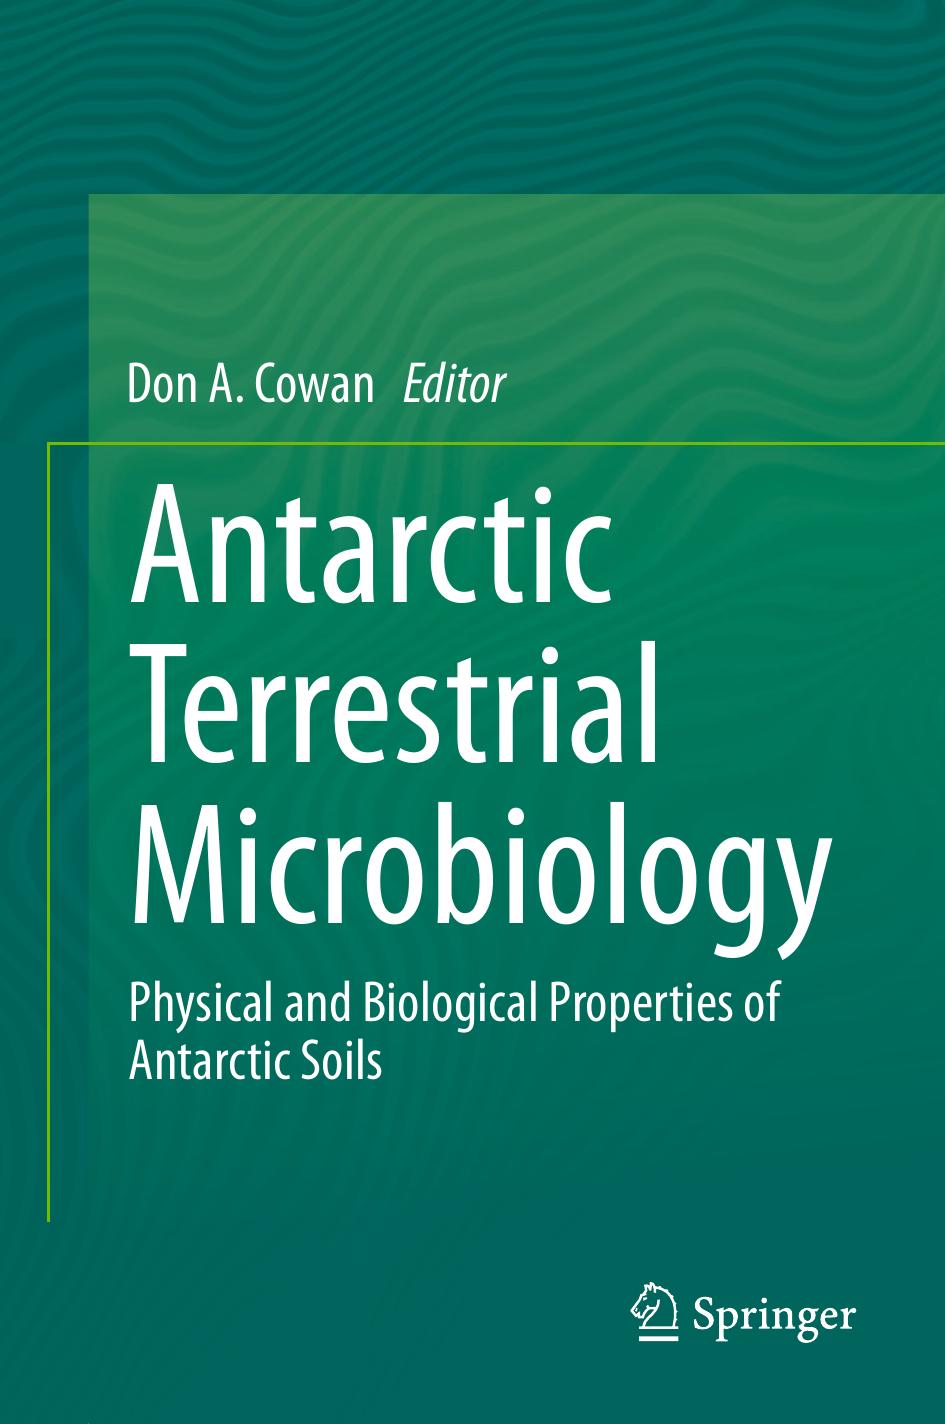 Antarctic Terrestrial Microbiology  Physical and Biological Properties of Antarctic Soils 2014